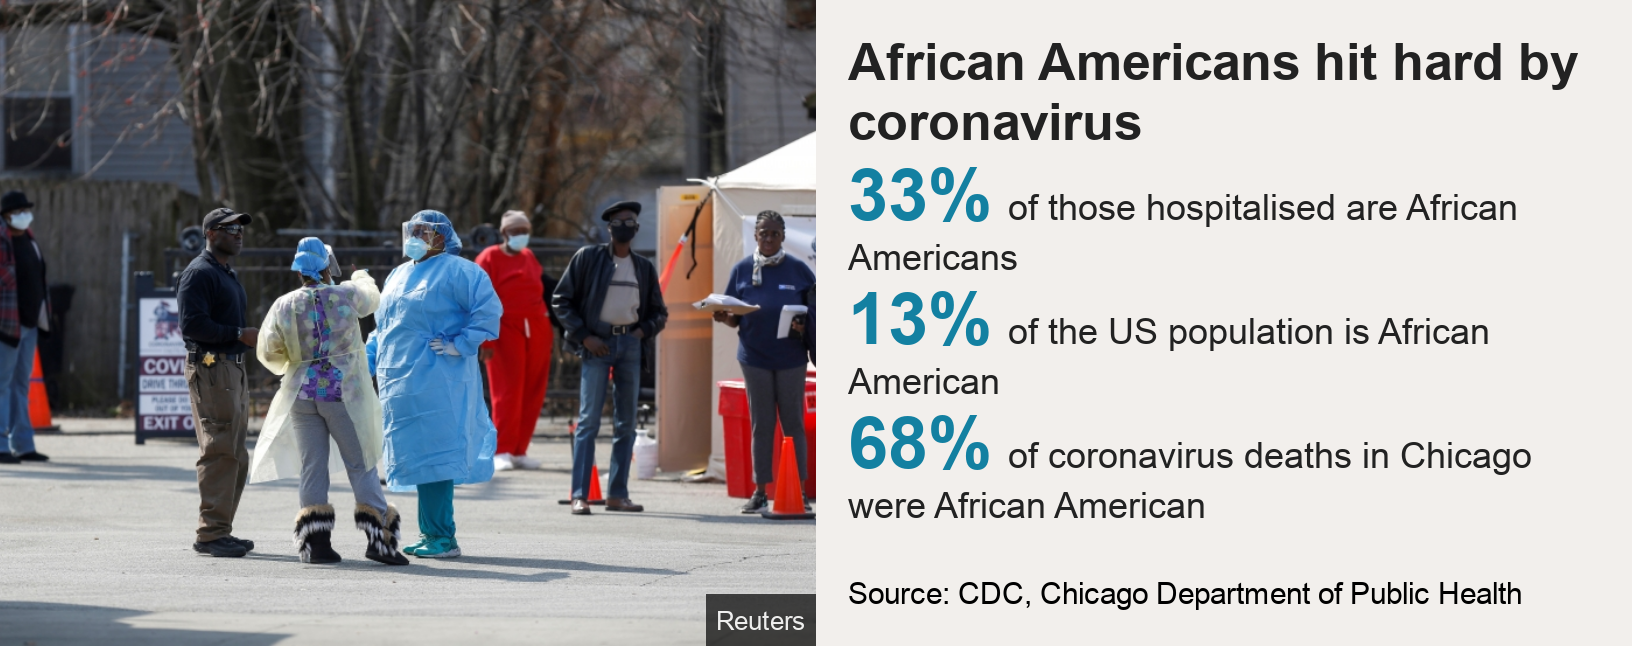 COVID-19 Impact on African-Americans